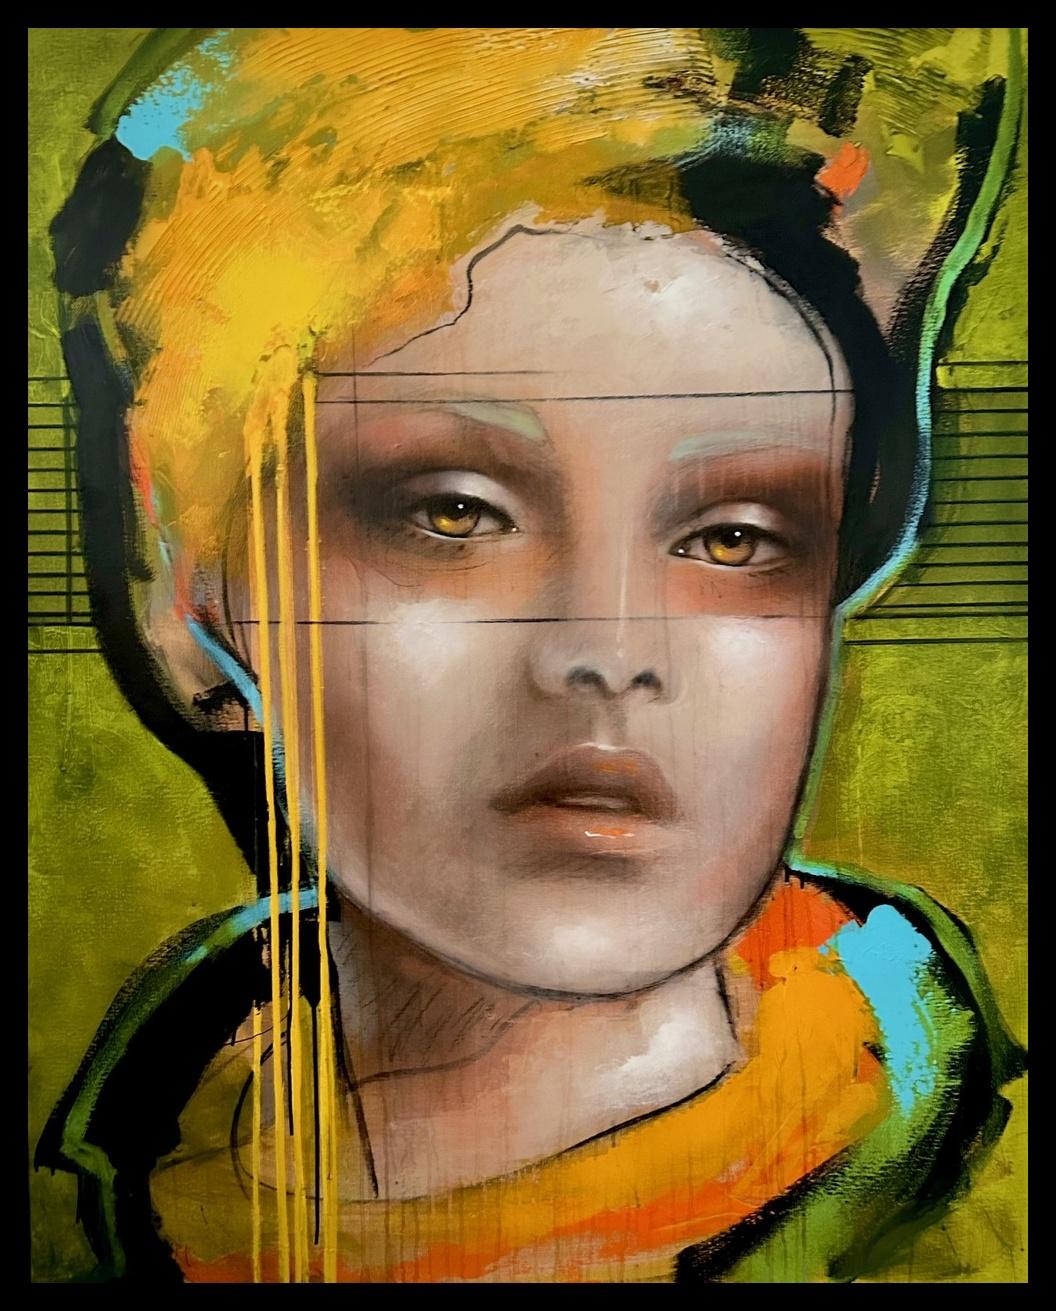 "Green Given" is part of Ger Doornink's 2024 collection. Abandoning the excessive use of different materials, Doornink still achieves a great depth in his portraits through the thick layers of paint. Colour after colour, brush-stroke after